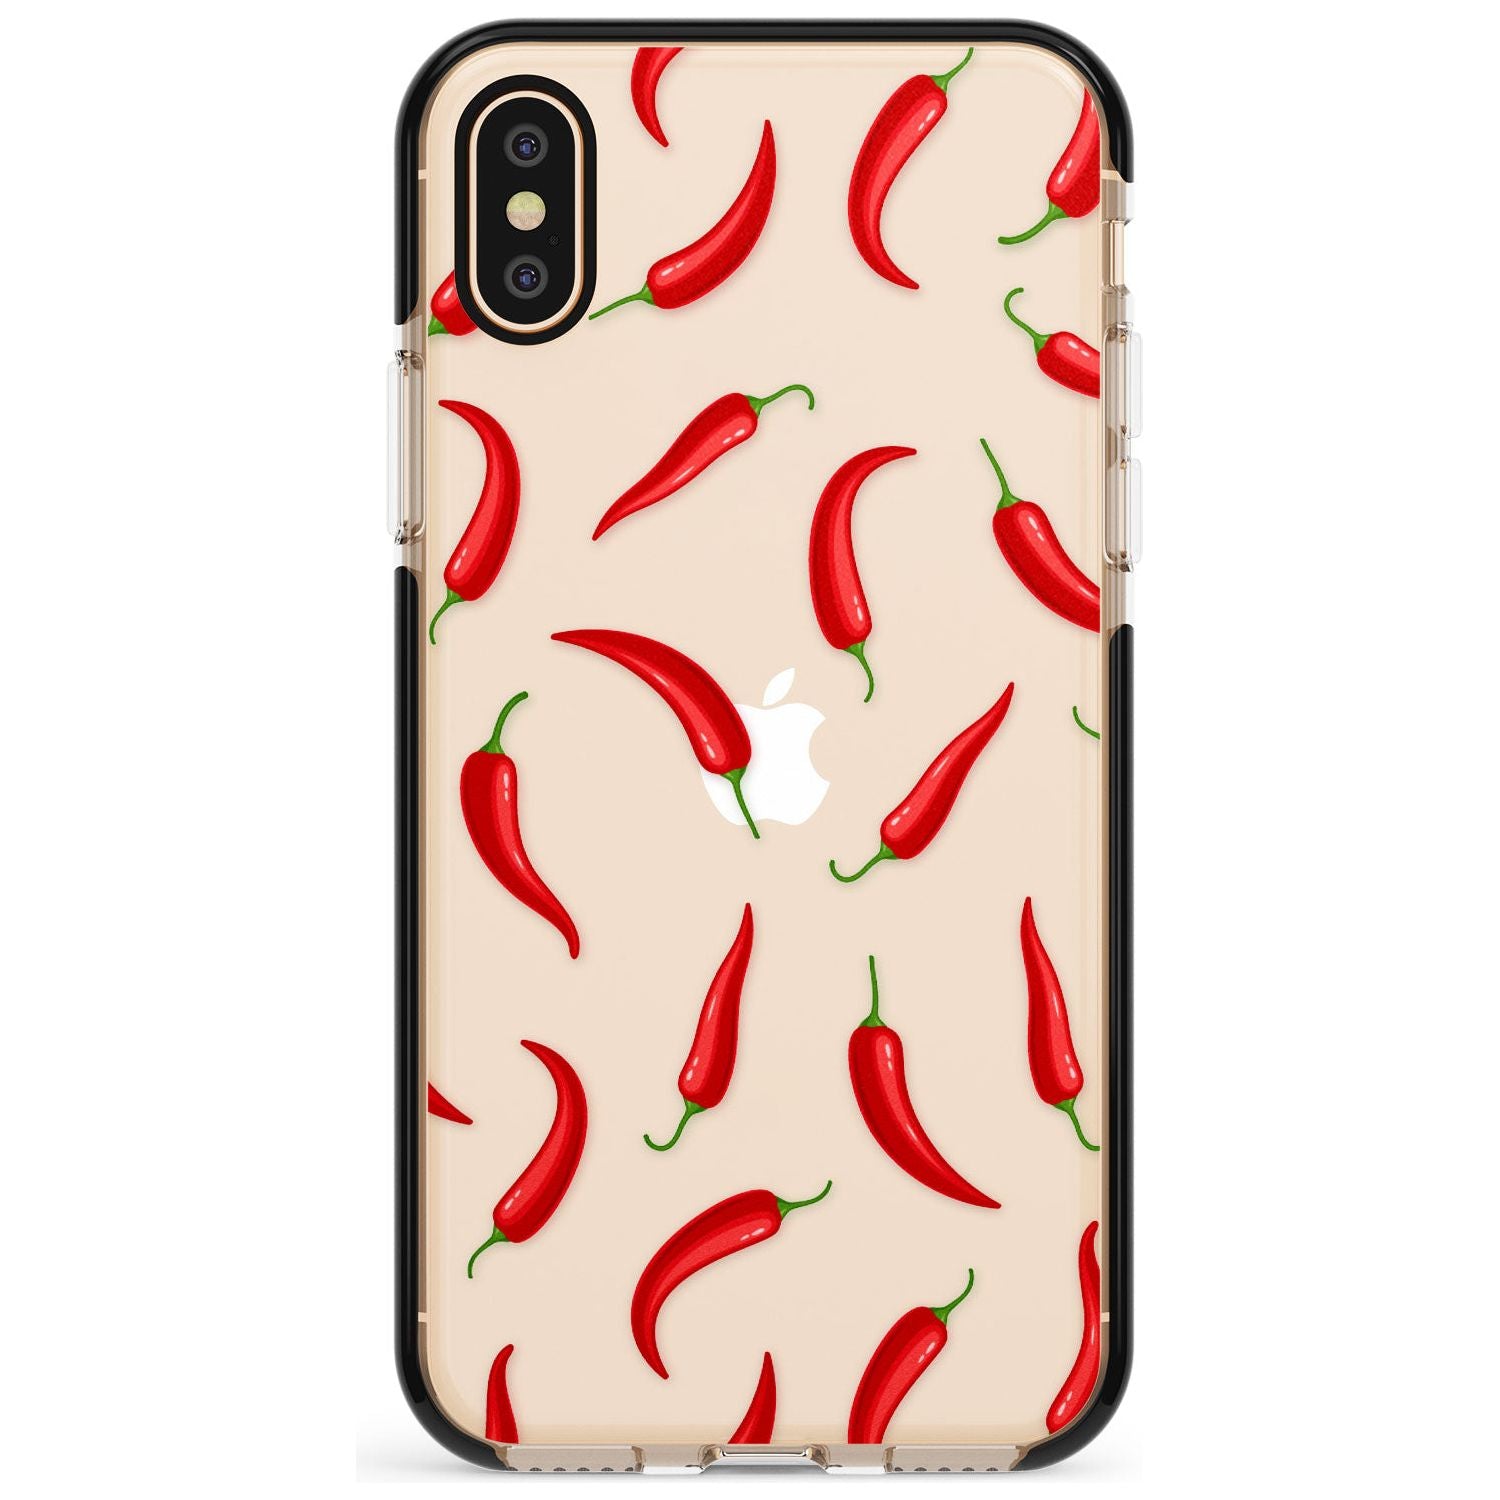 Chilly Pattern Black Impact Phone Case for iPhone X XS Max XR